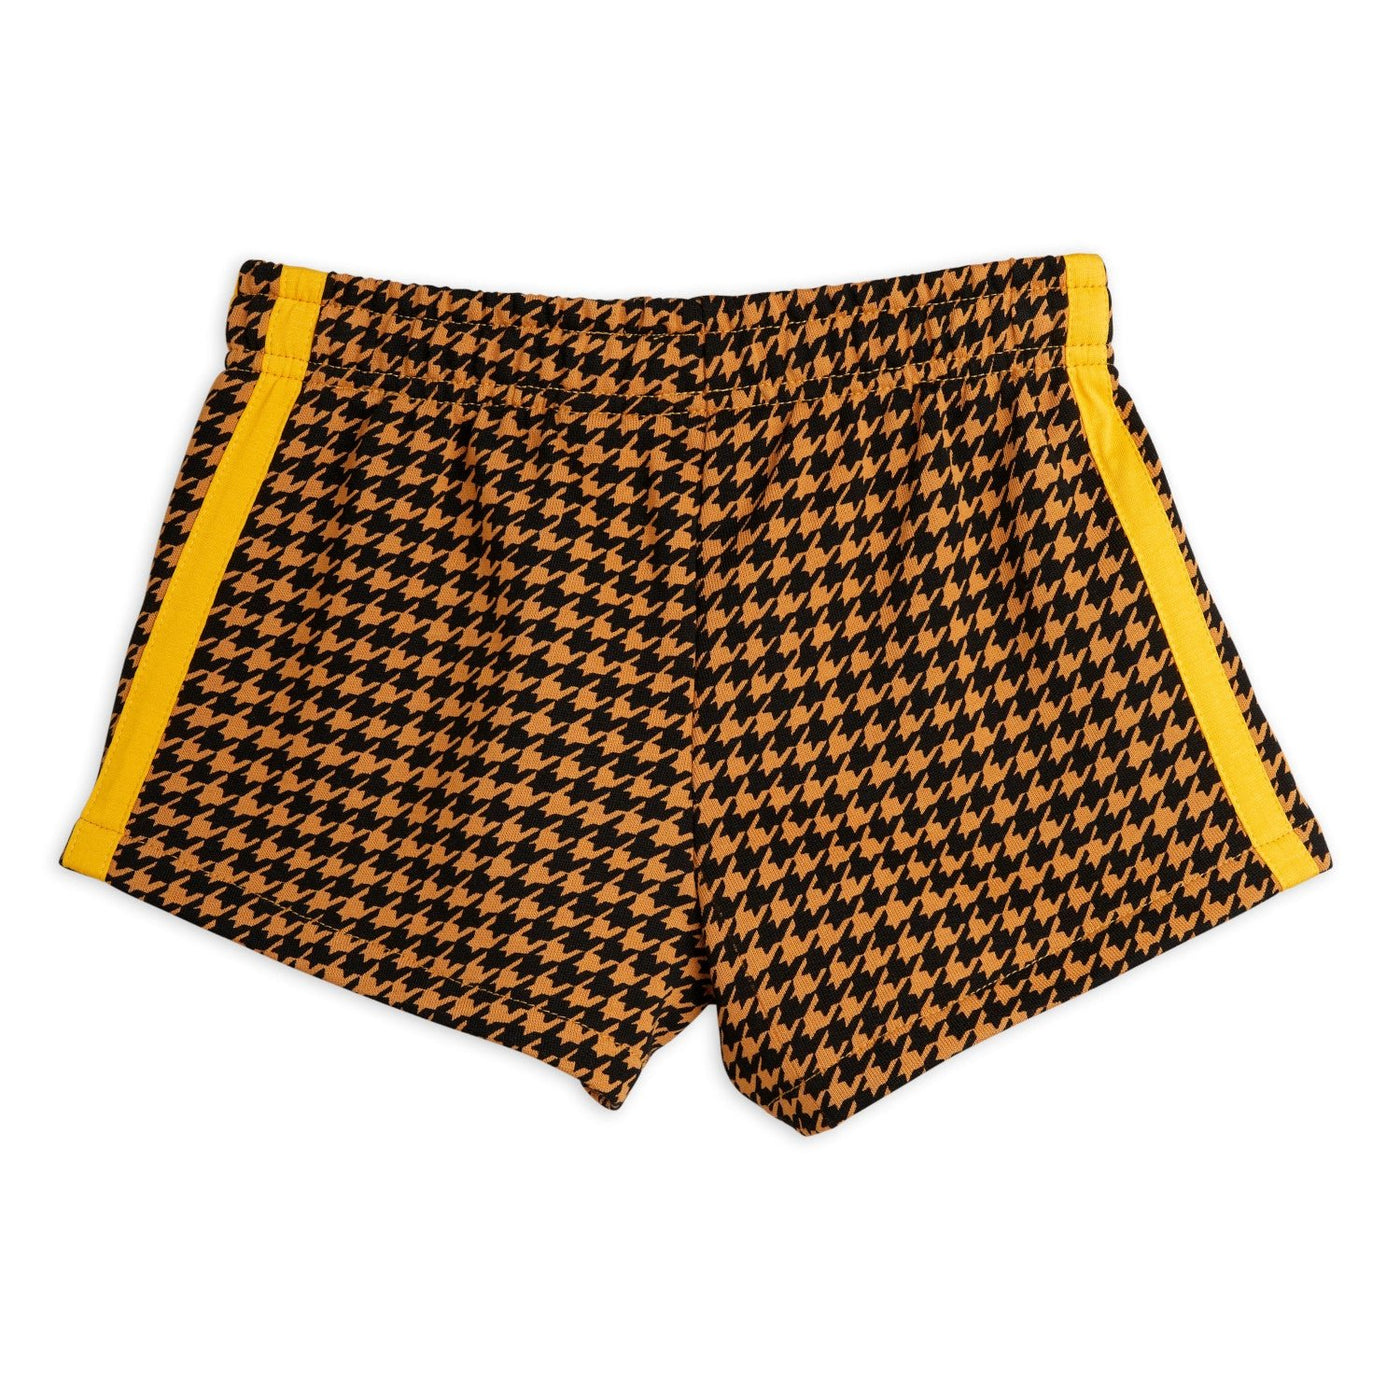 Houndstooth Shorts (Brown) by Mini Rodini - Petite Belle